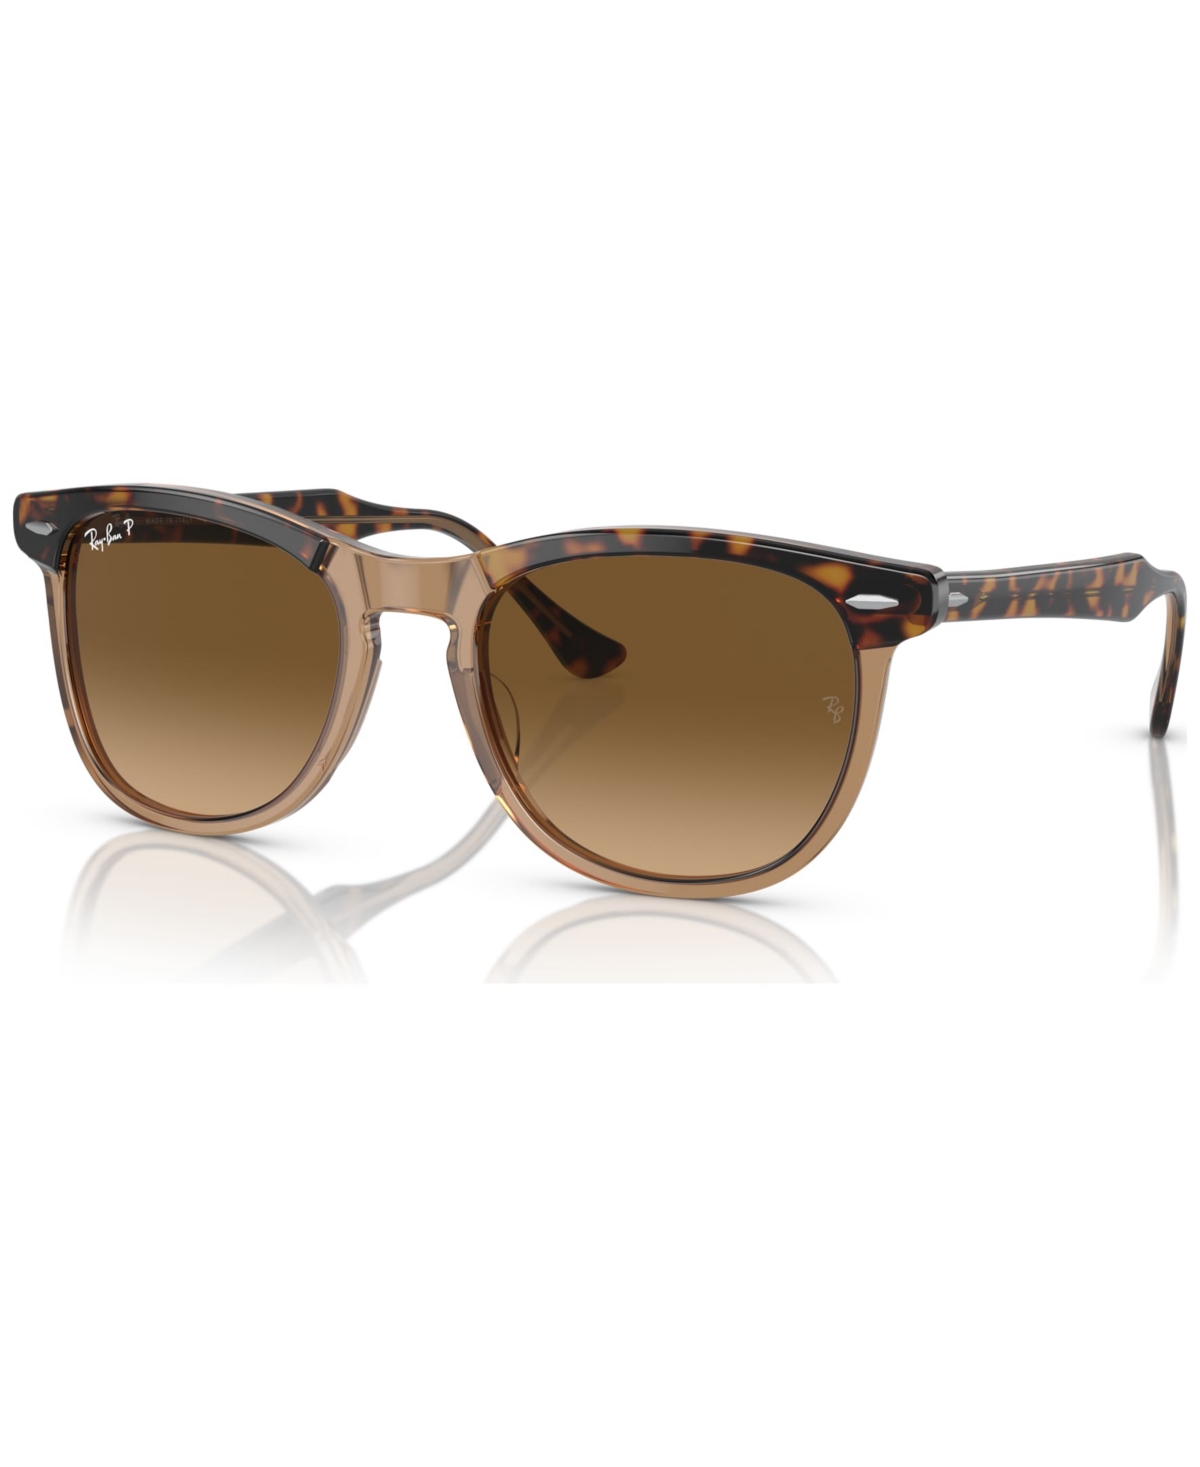 Shop Ray Ban Unisex Eagle Eye Polarized Sunglasses, Rb239853-yp 53 In Havana On Transparent Brown